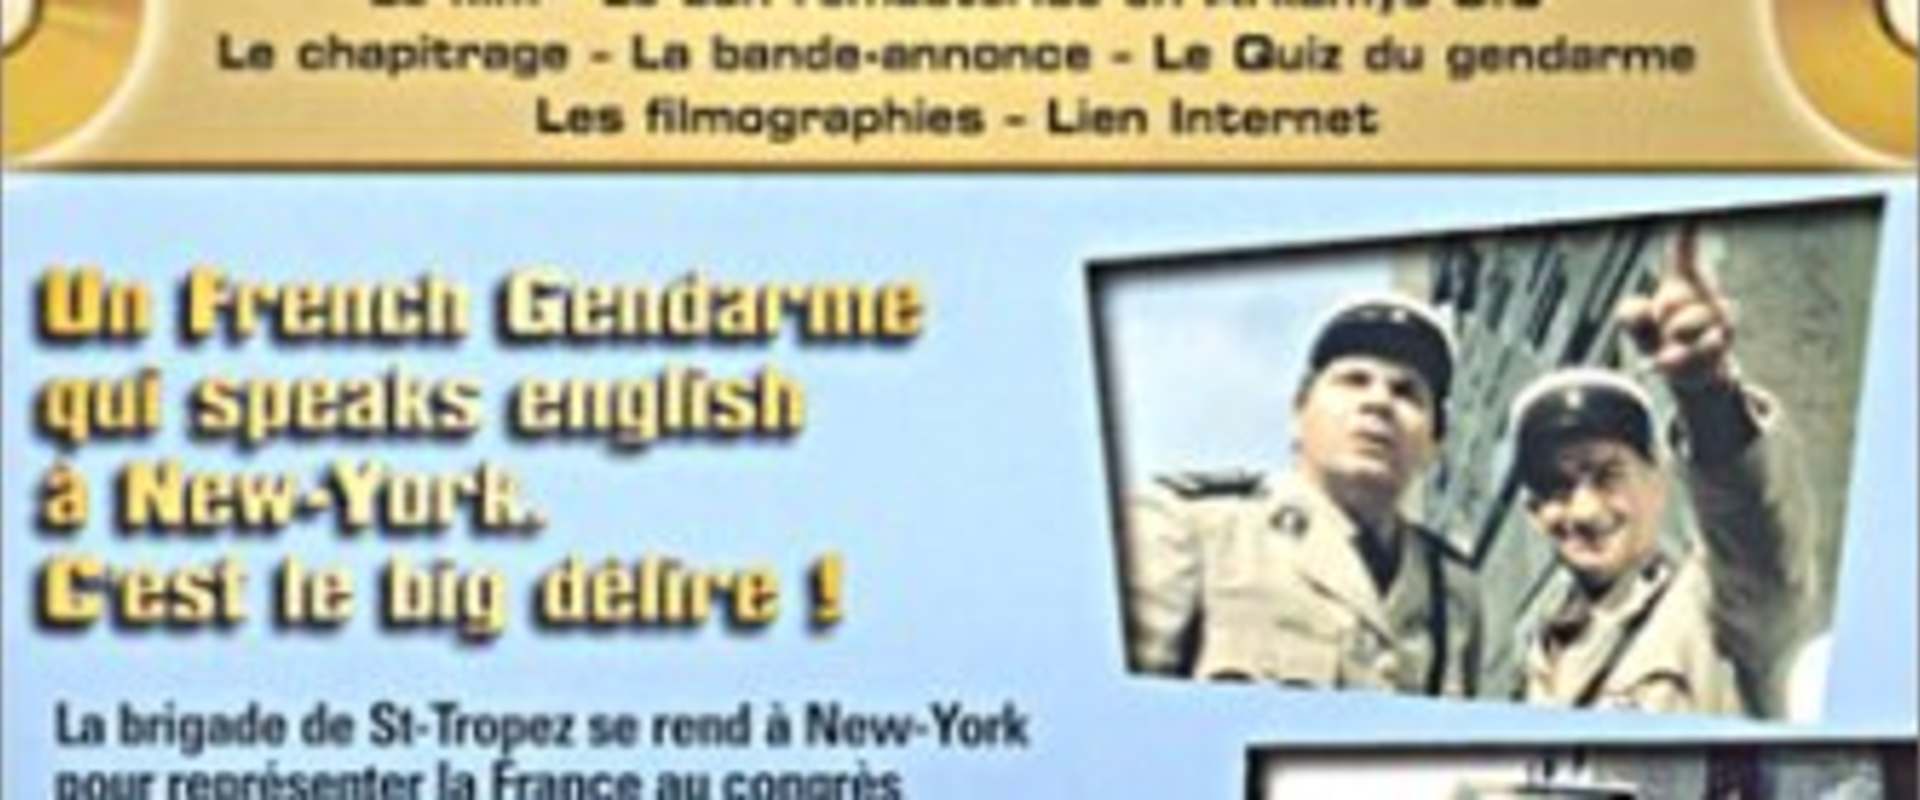 The Gendarme in New York background 1